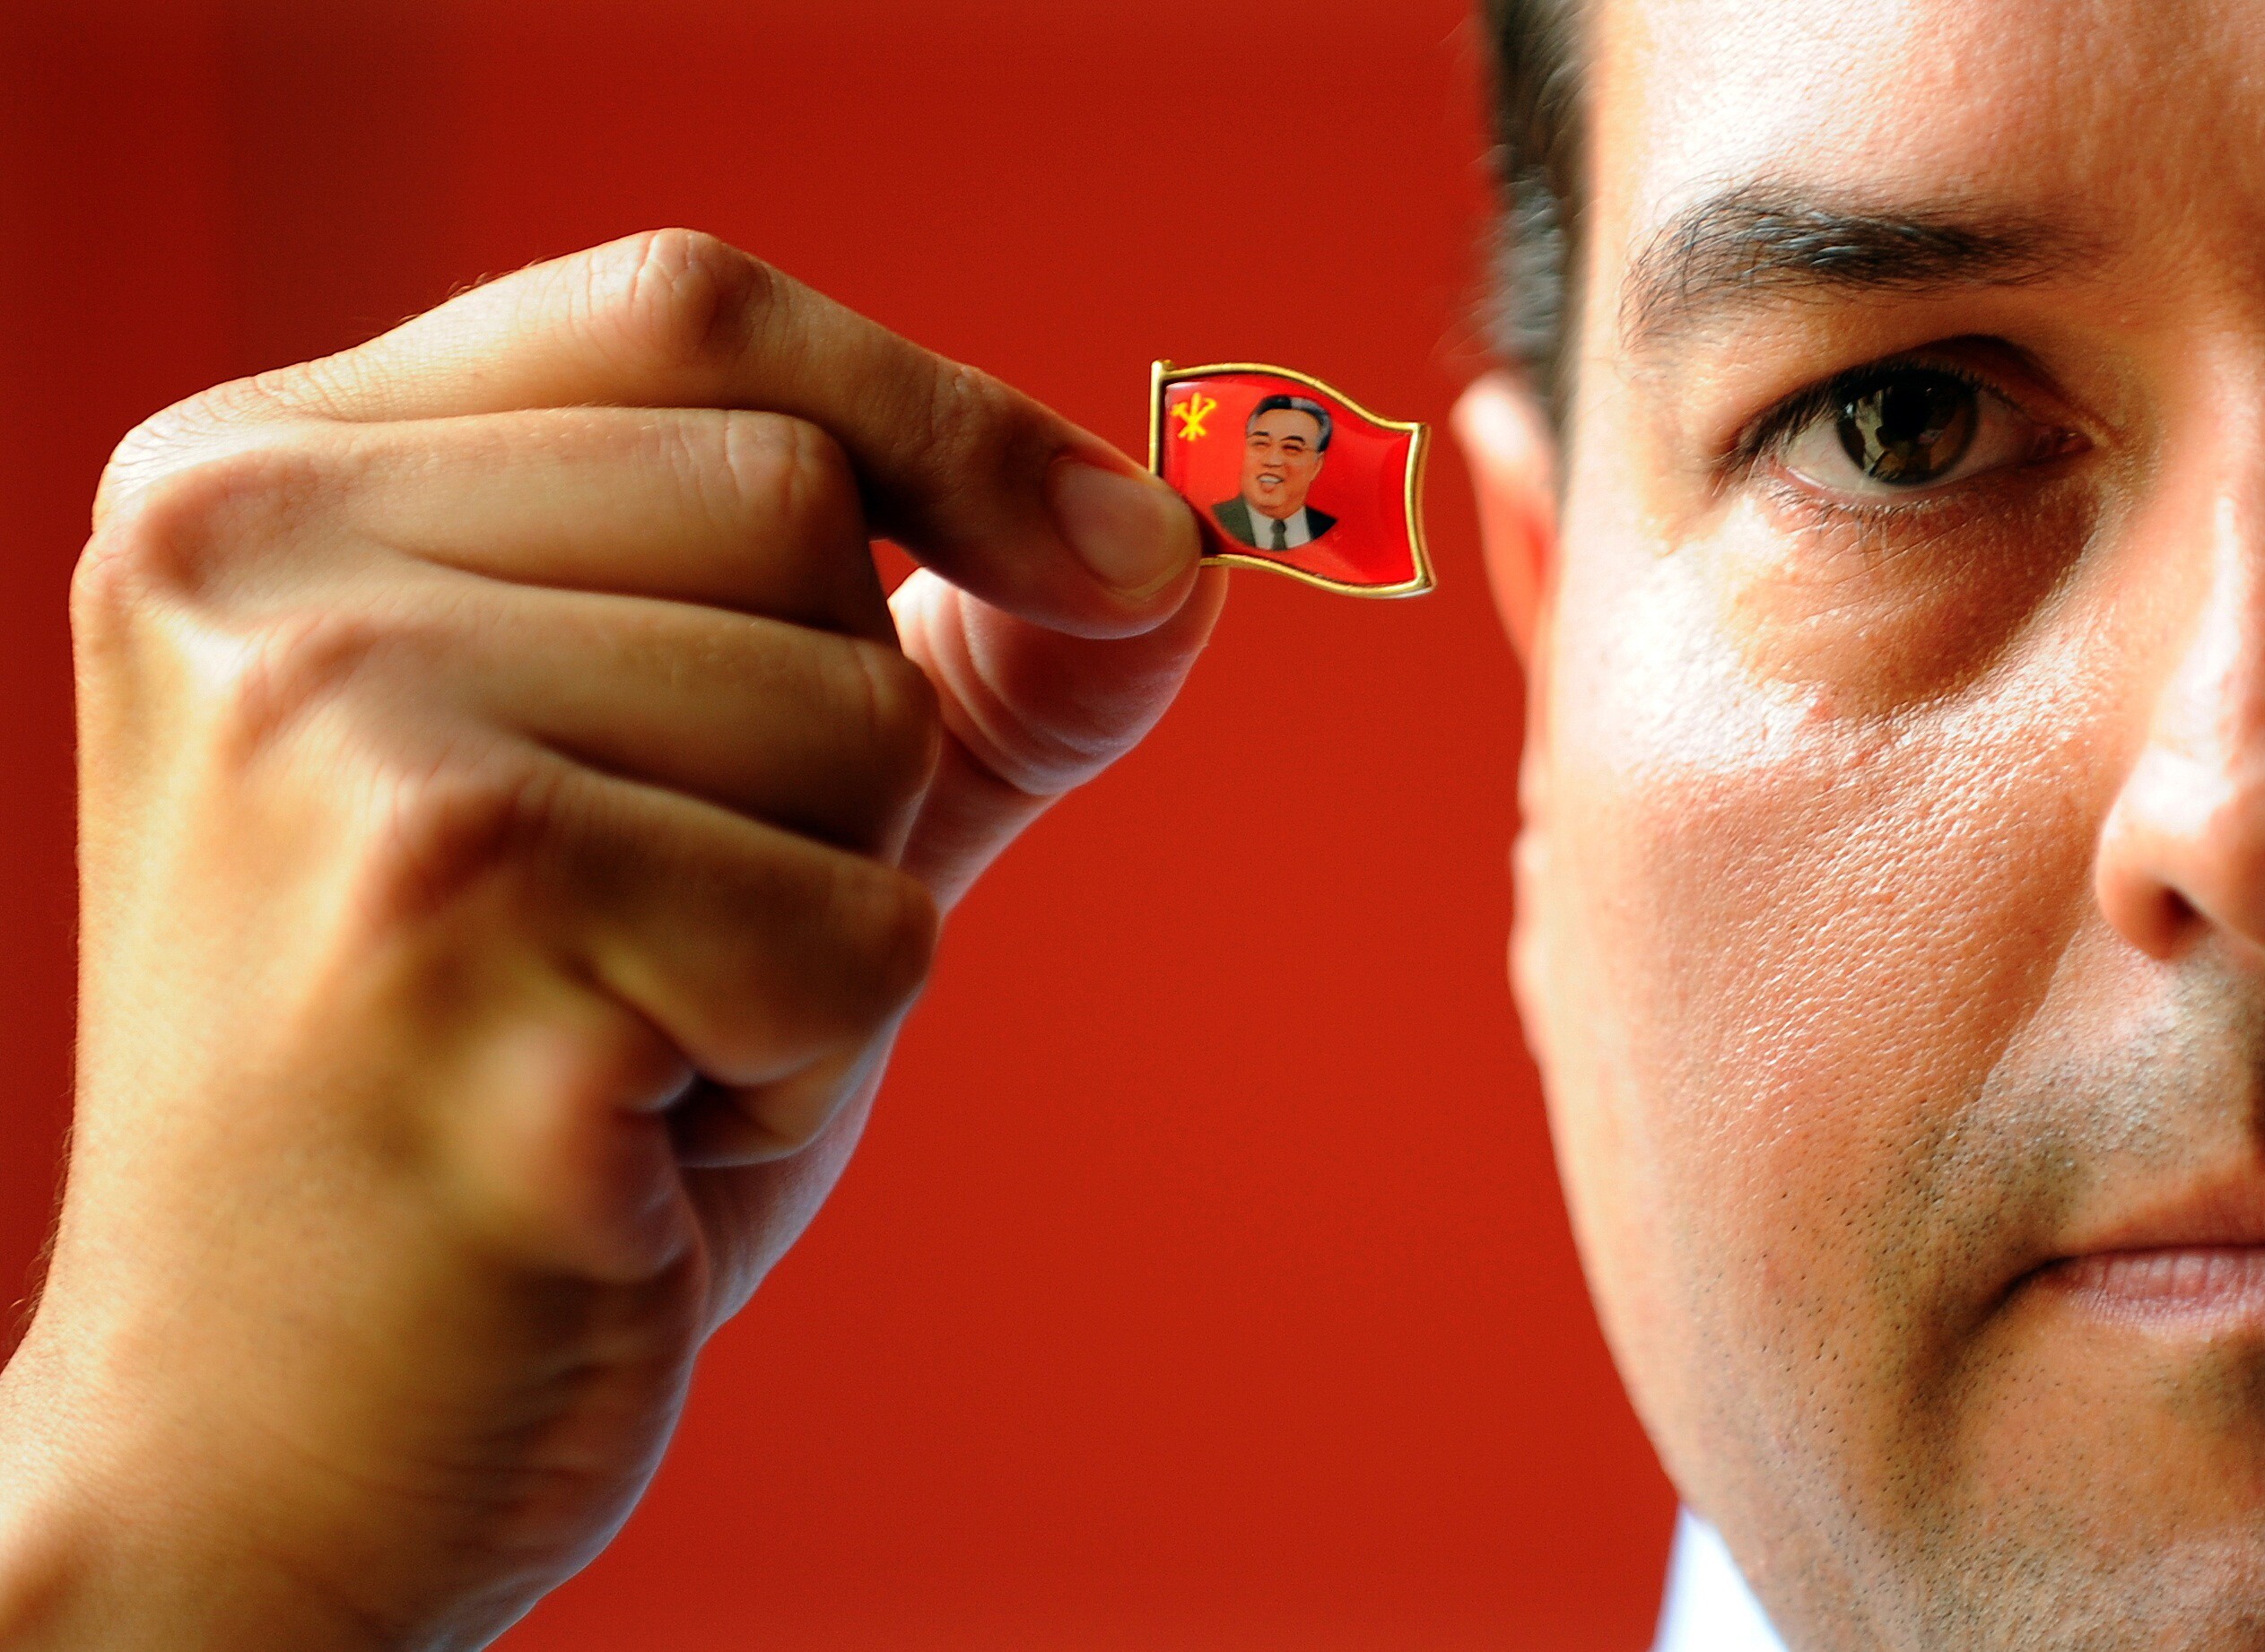 Alejandro Cao de Benós, a special delegate to North Korea’s Committee for Cultural Relations with Foreign Countries, holds a pin of the country’s first supreme leader, Kim Il-sung. Photo: AFP